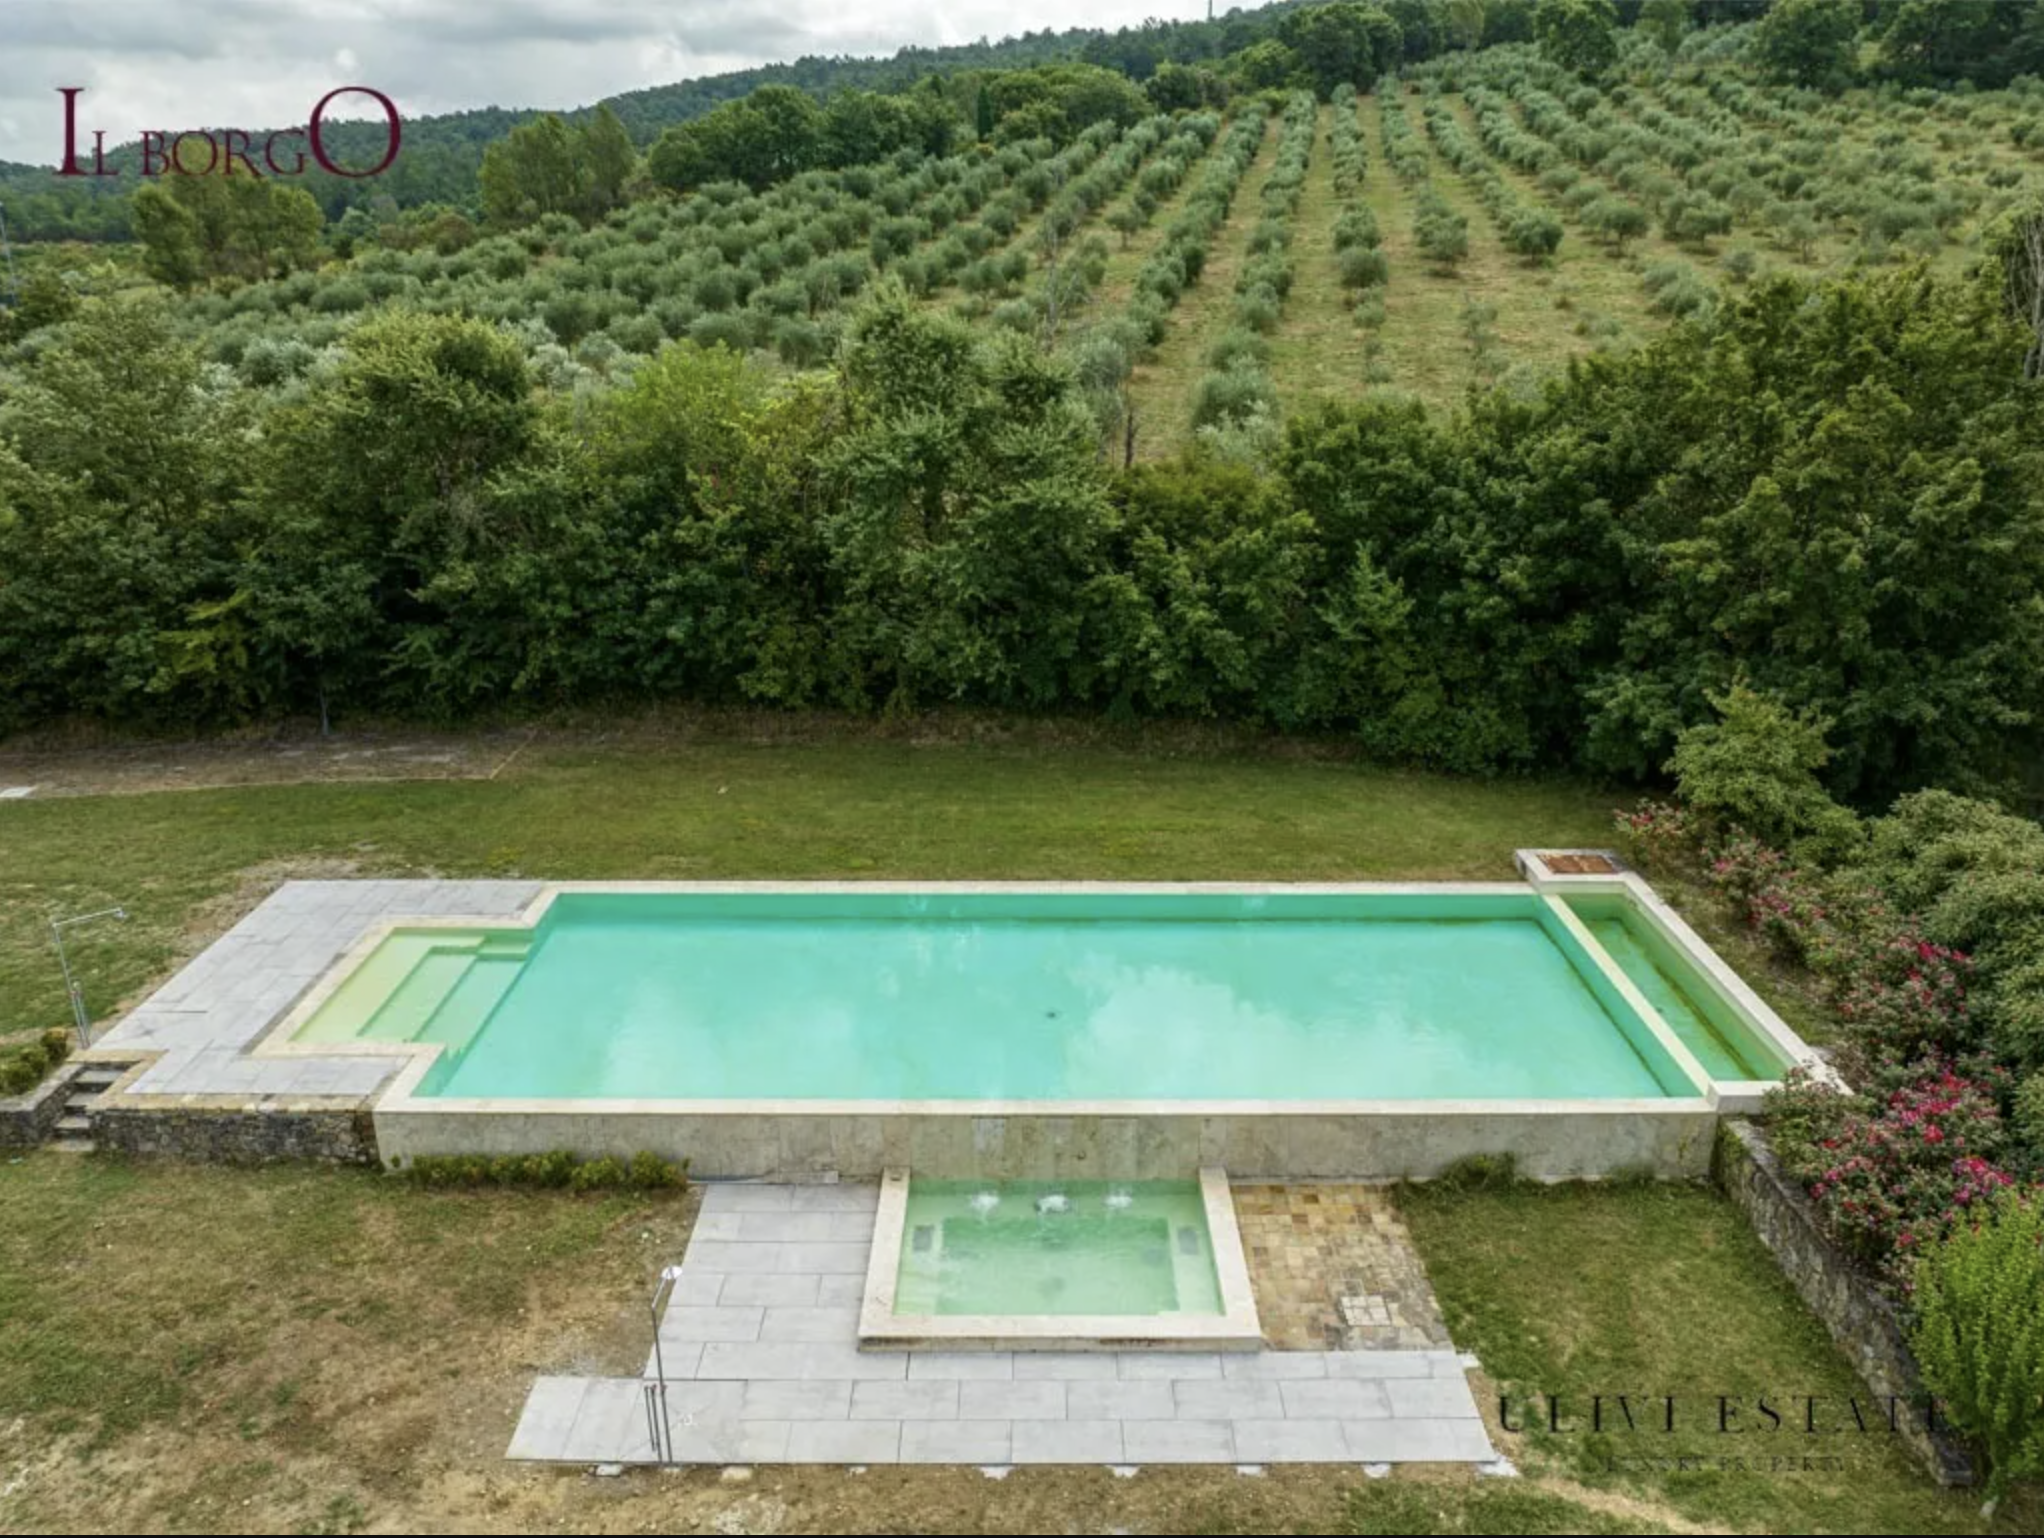 Francis York Borgo Pieve di Comunaglia in Umbria, Italy With 17 Country Houses, 1000-Year-Old Church, Vineyards 00011.png